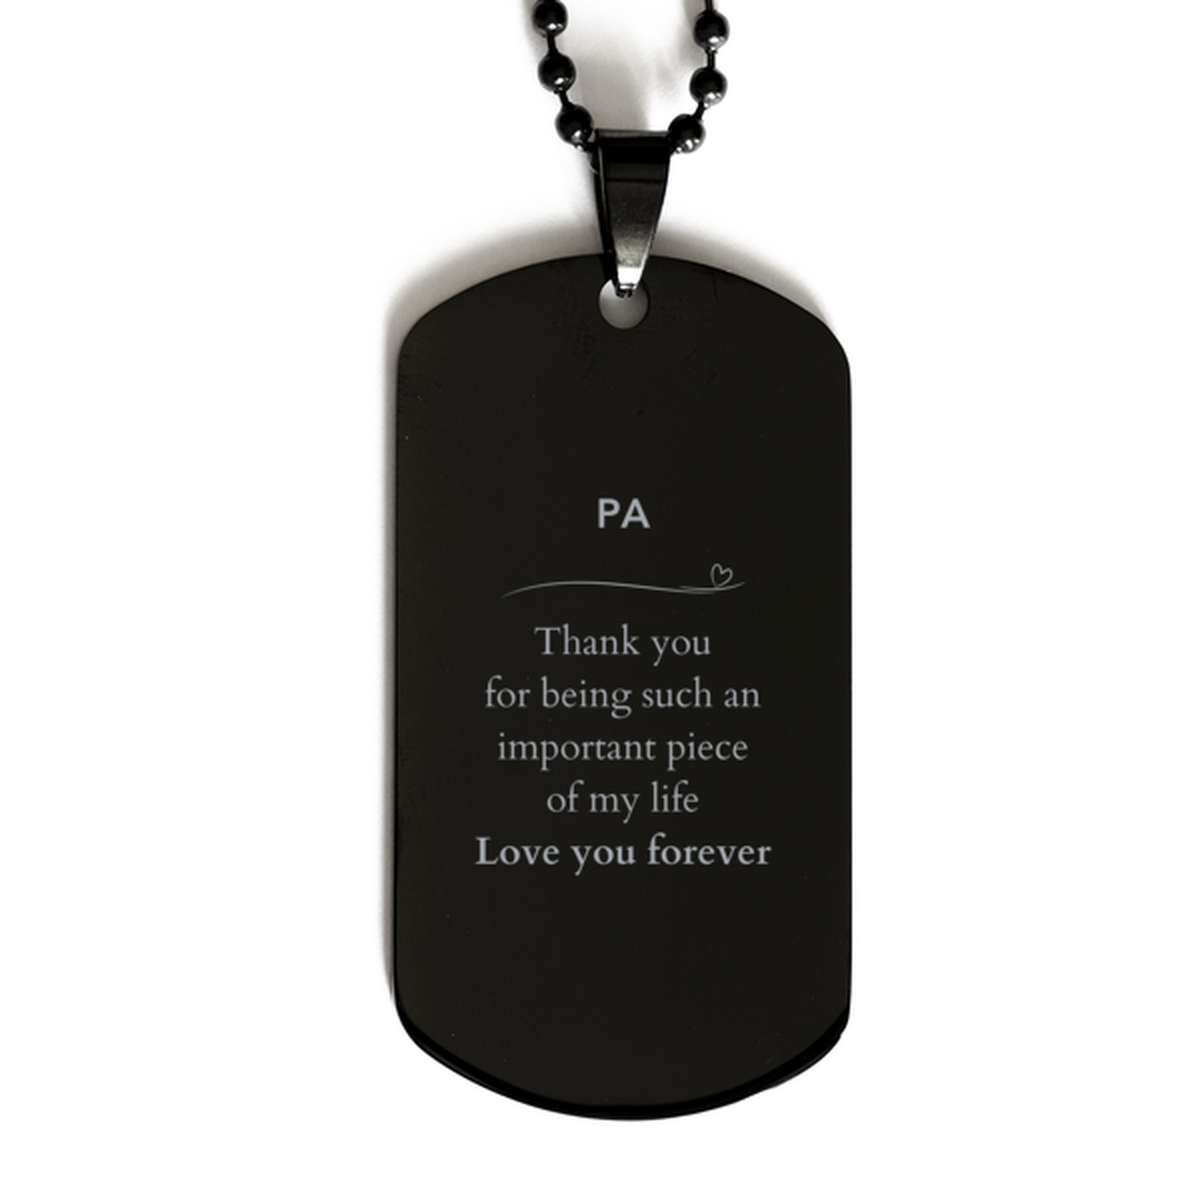 Appropriate Pa Black Dog Tag Epic Birthday Gifts for Pa Thank you for being such an important piece of my life Pa Christmas Mothers Fathers Day